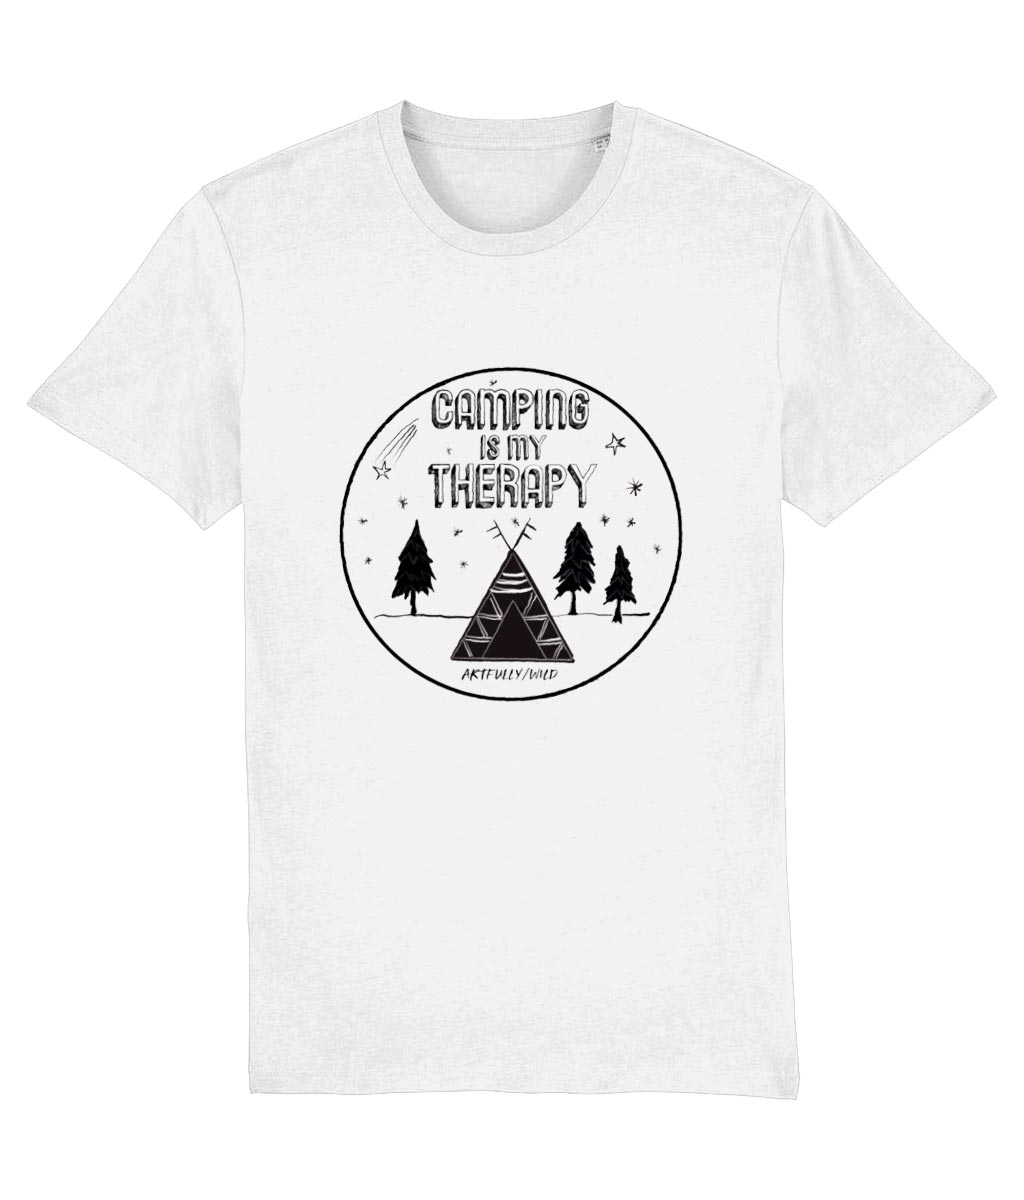 'CAMPING IS MY THERAPY' Organic Unisex White T-Shirt. Printed with eco-friendly water-based Inks. Original Design by Artfully Wild.